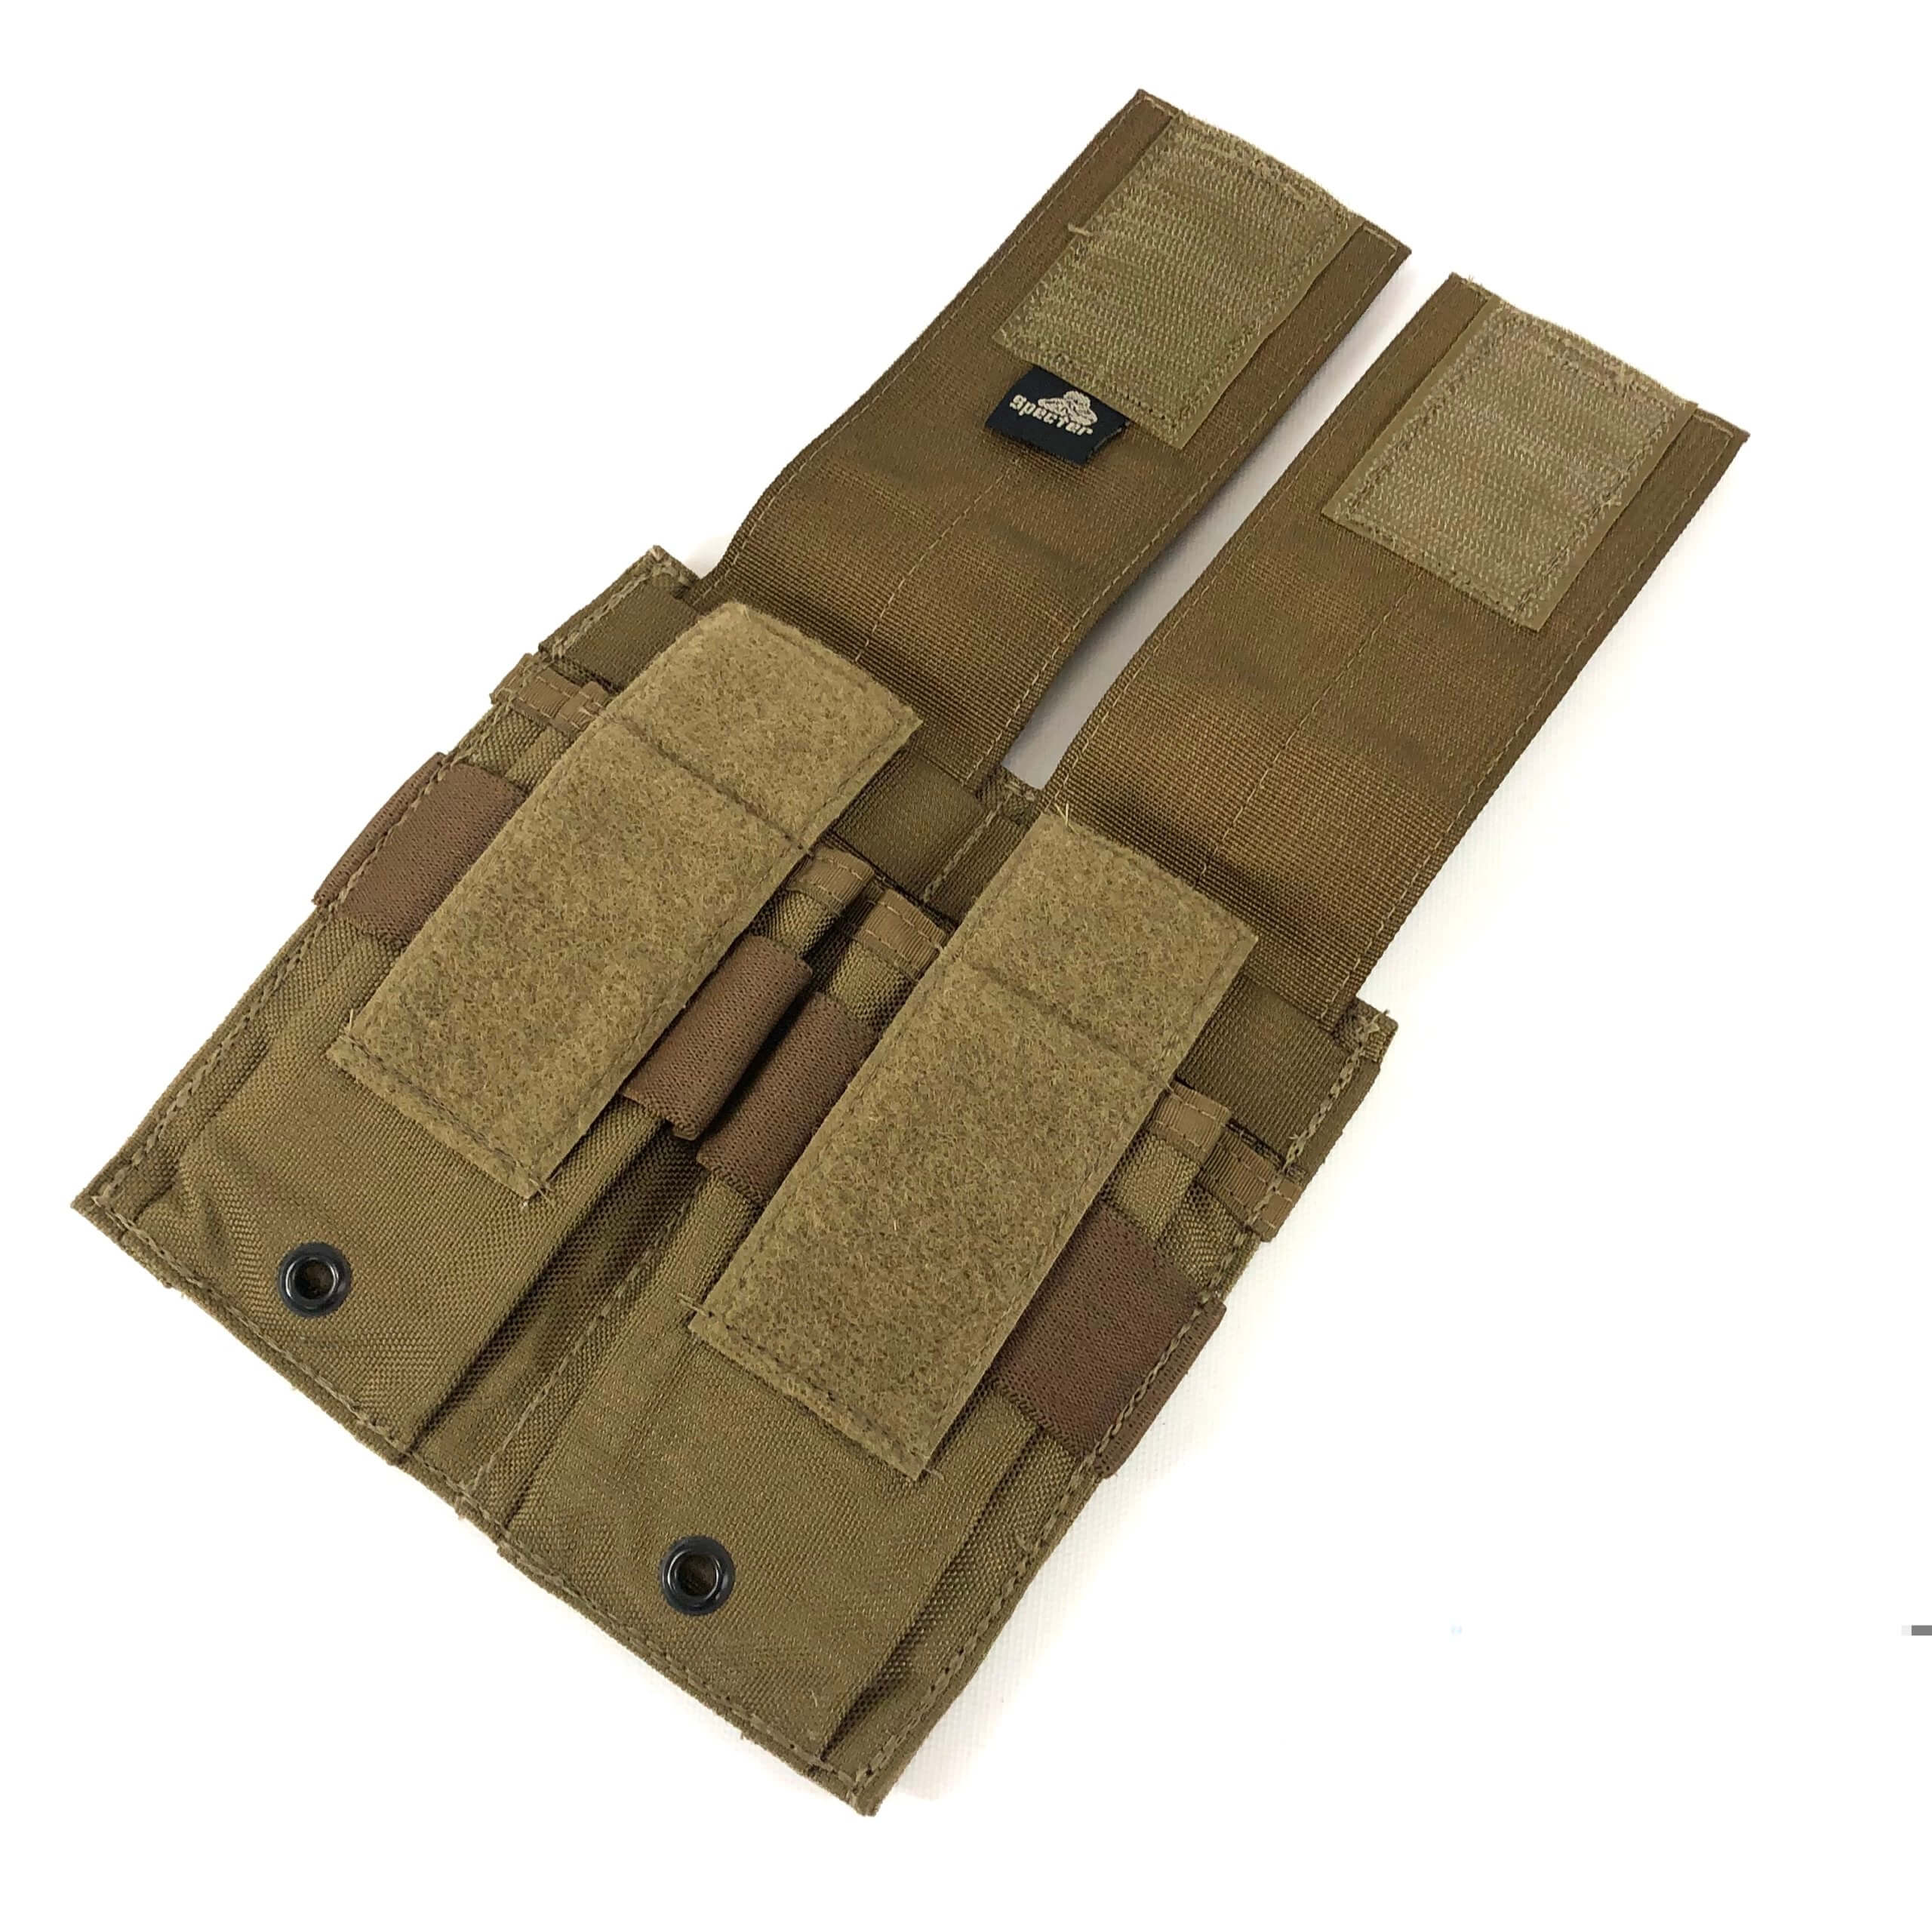 SPECTER GEAR 425 COYOTE USMC US MILITARY MOLLE GROUND FLARE SMG MAGAZINE POUCH 